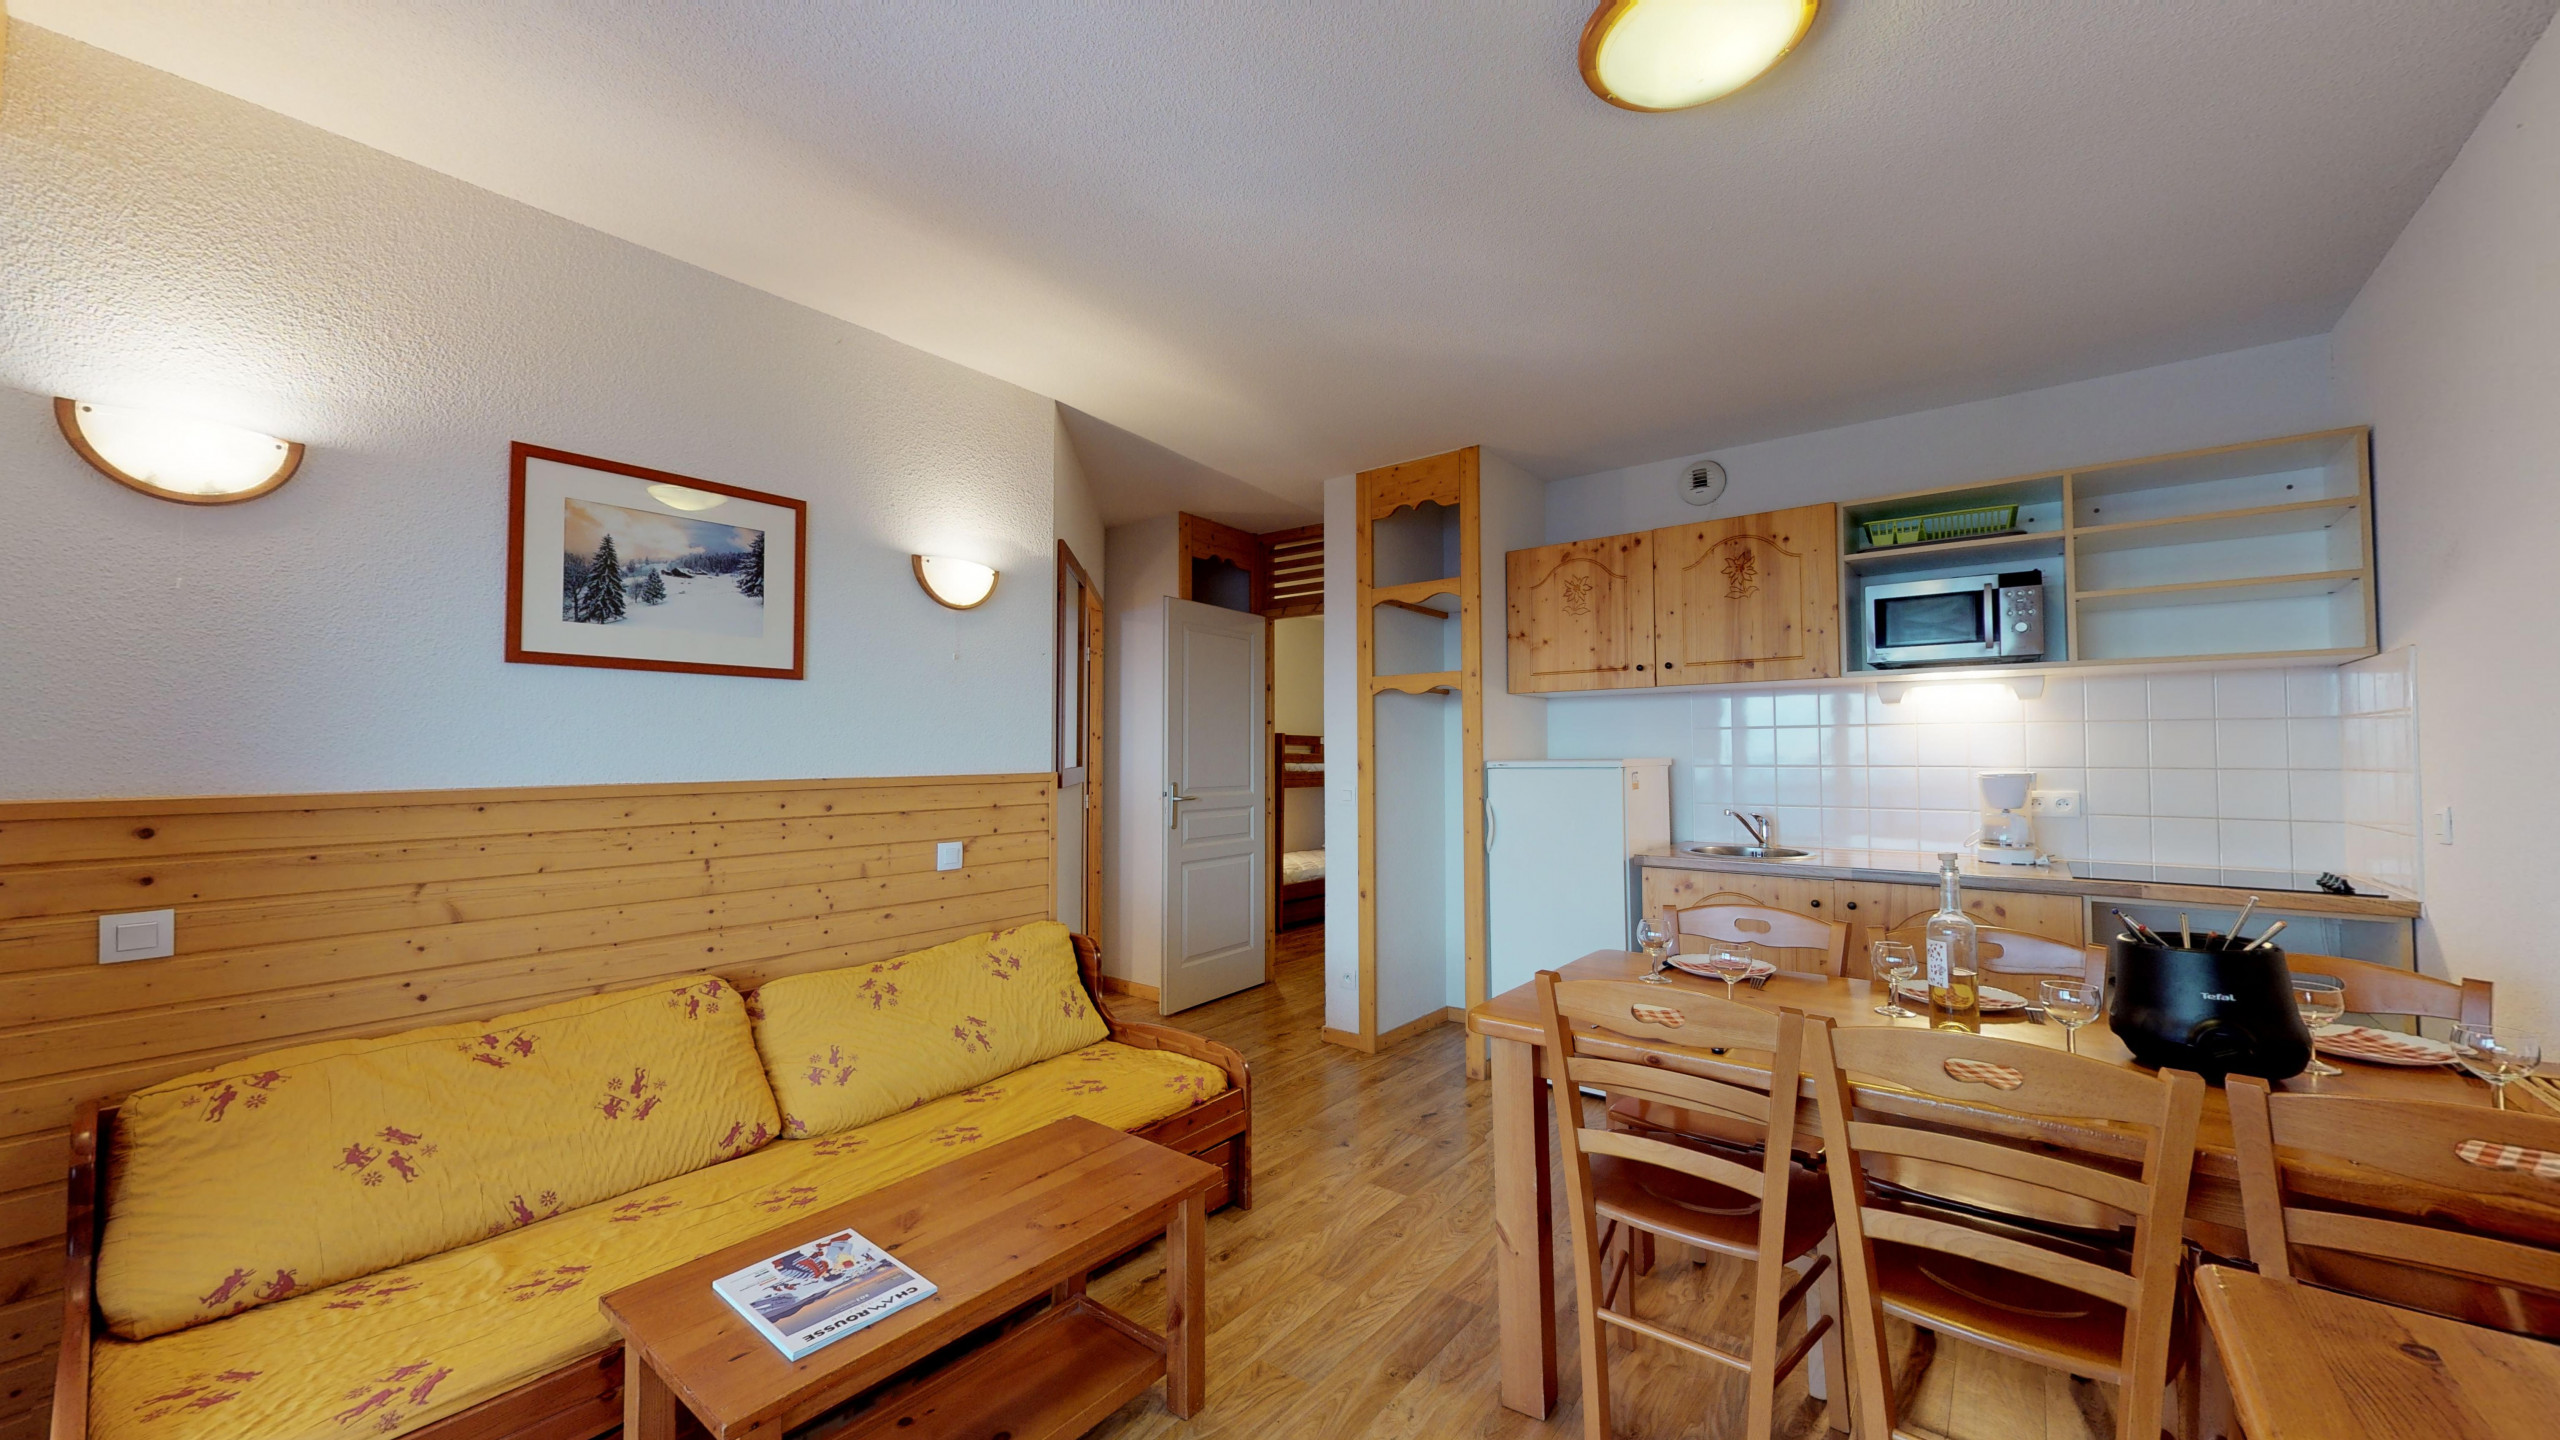 Appartement Chartreuse 1 039-FAMILLE & MONTAGNE appart. 6 pers - Chamrousse